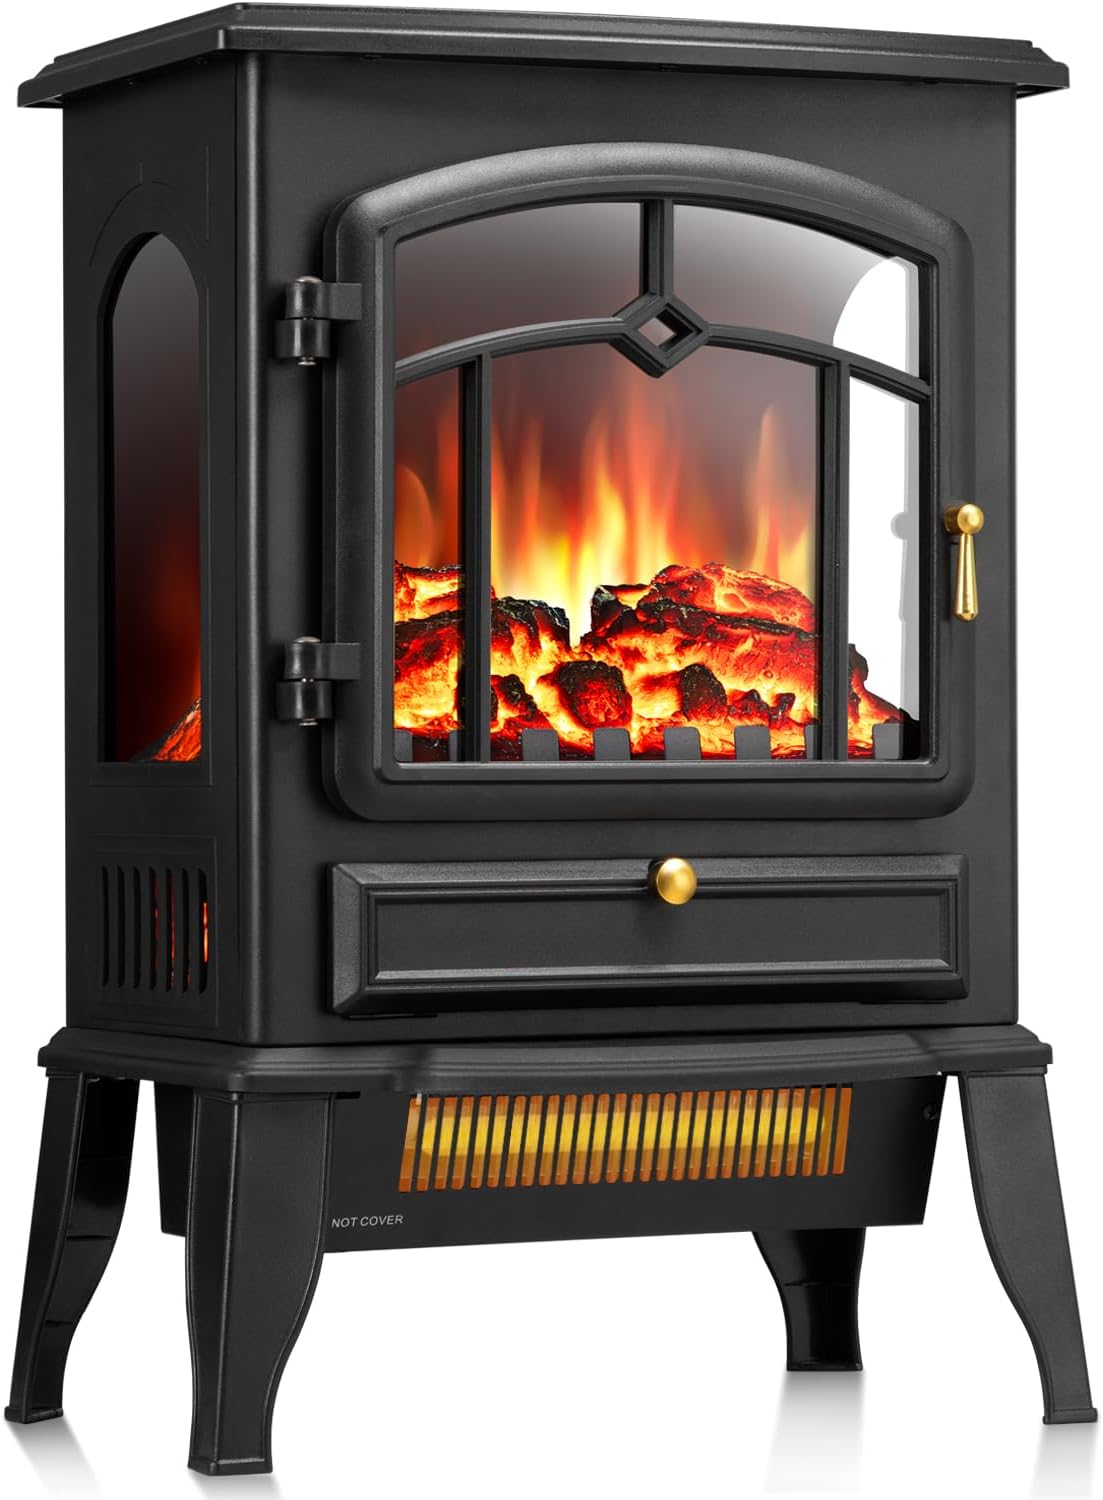 R.W.FLAME Electric Fireplace Stove Heater with Thermostat, 3D Flame, Adjustable Heat, Overheat Protection